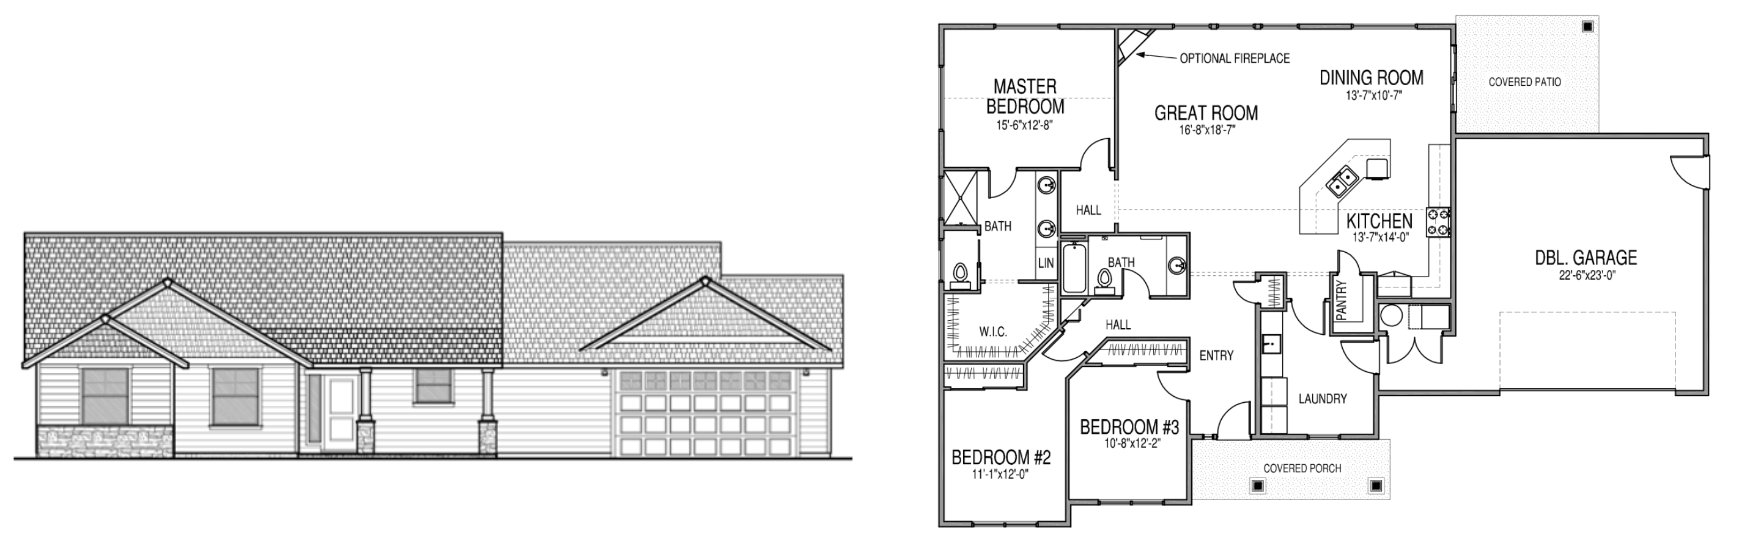 Commonwealth 2 single story home floor plan with a master bedroom with a walk in closet and bathroom, 2 additional bedrooms, another bathroom, a great room, dining room, kitchen, pantry, laundry room, double garage, and a covered porch and patio